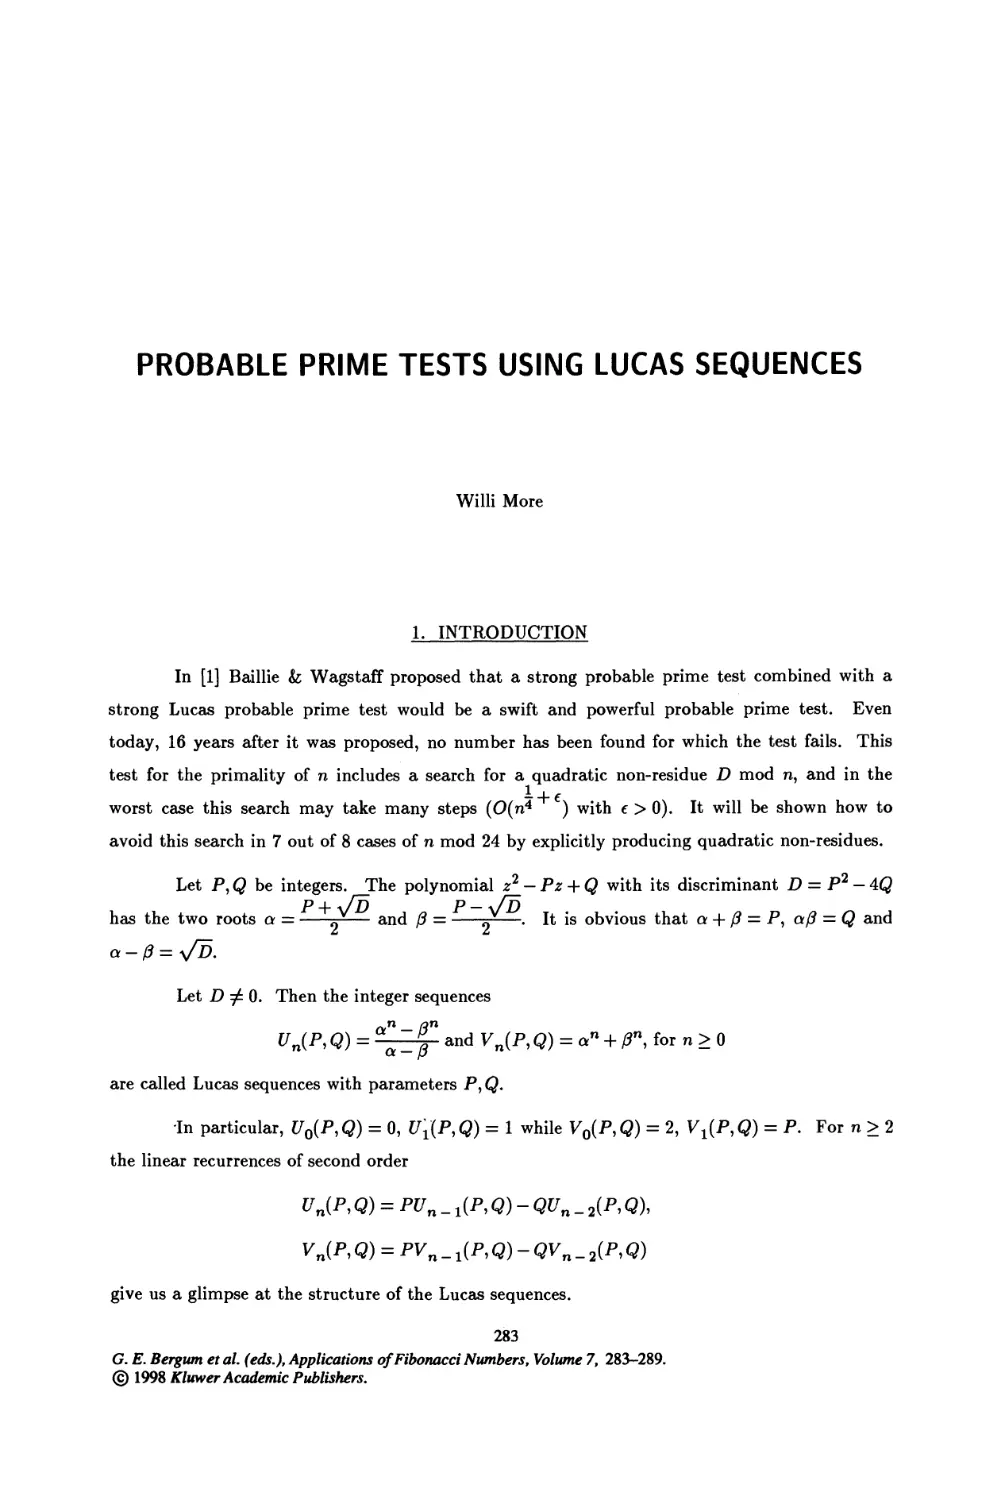 32. Probable Prime Tests Using Lucas Sequences